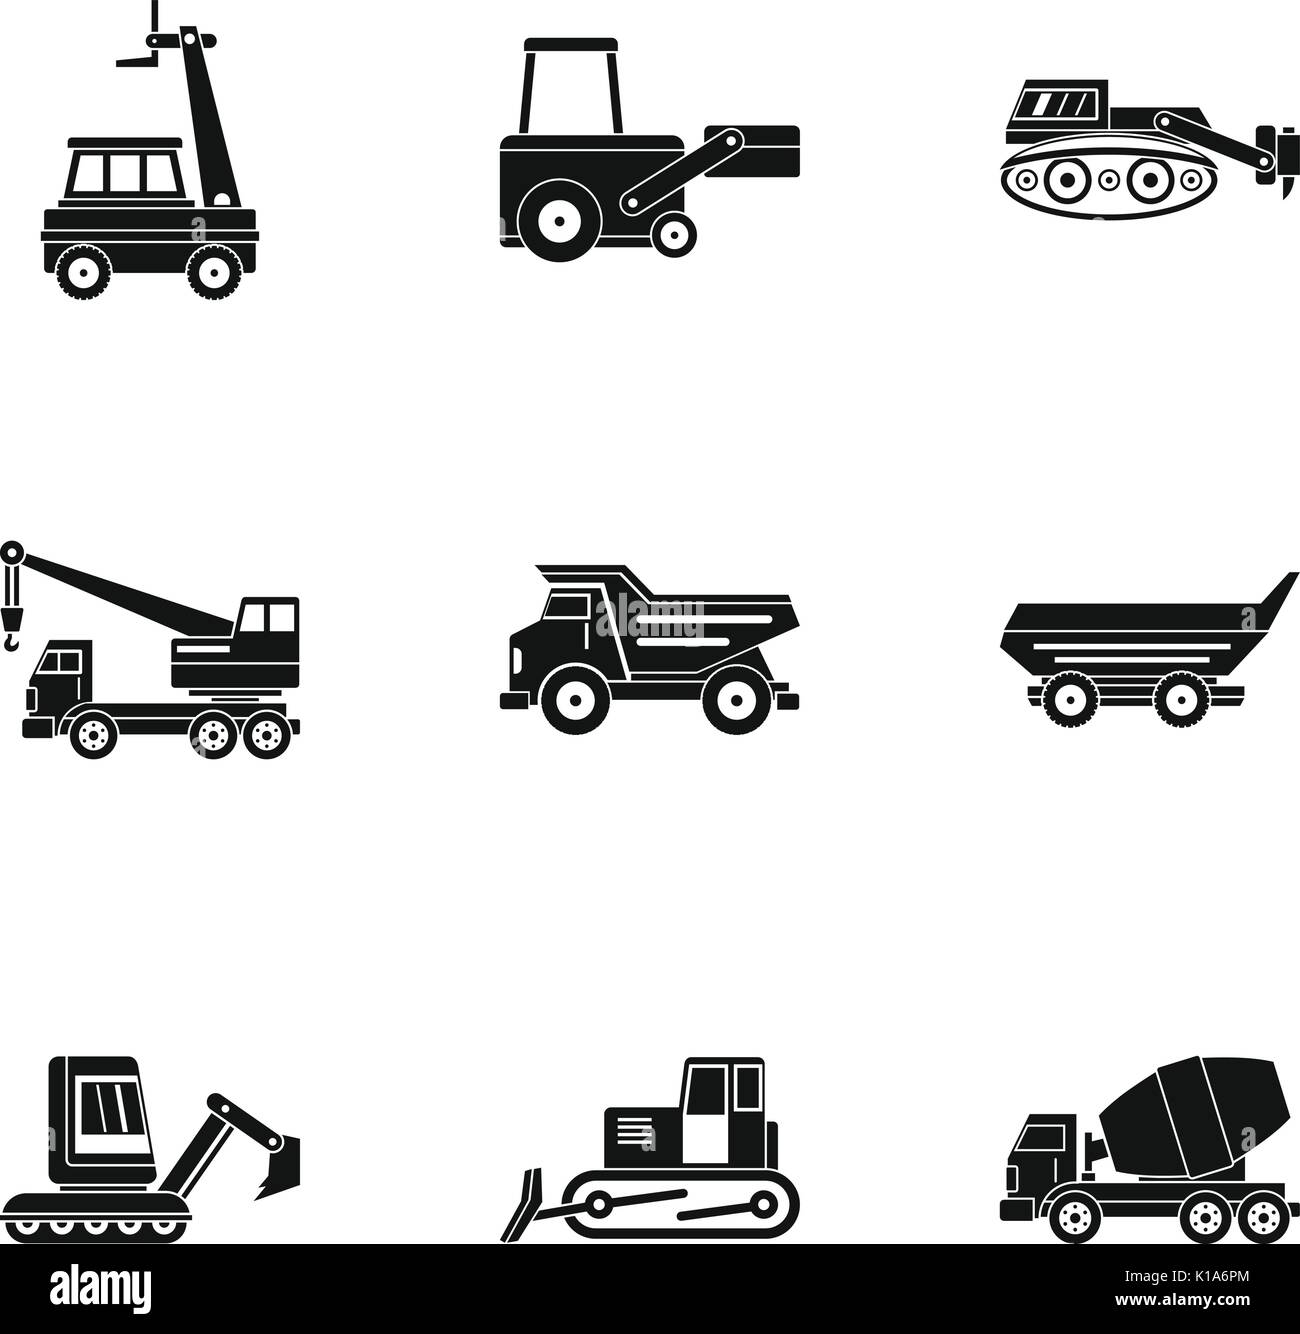 Construction heavy vehicle icon set, simple style Stock Vector